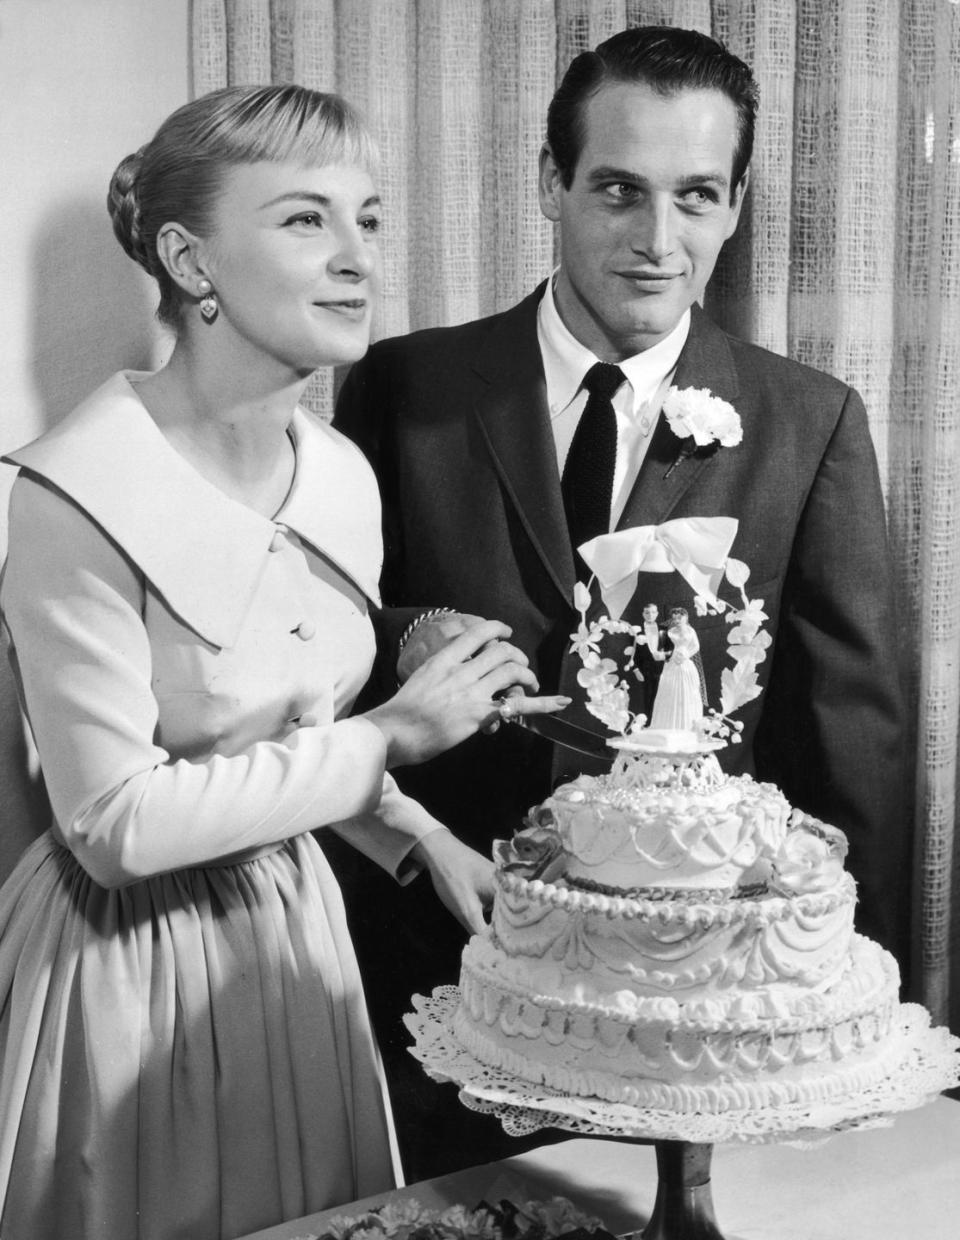 29th january 1958 american actors joanne woodward, wearing a pale colored dress with a pleated skirt, and paul newman, wearing a suit and tie, holding a knife together as they prepare to cut into their wedding cake, las vegas, nevada photo by hulton archivegetty images